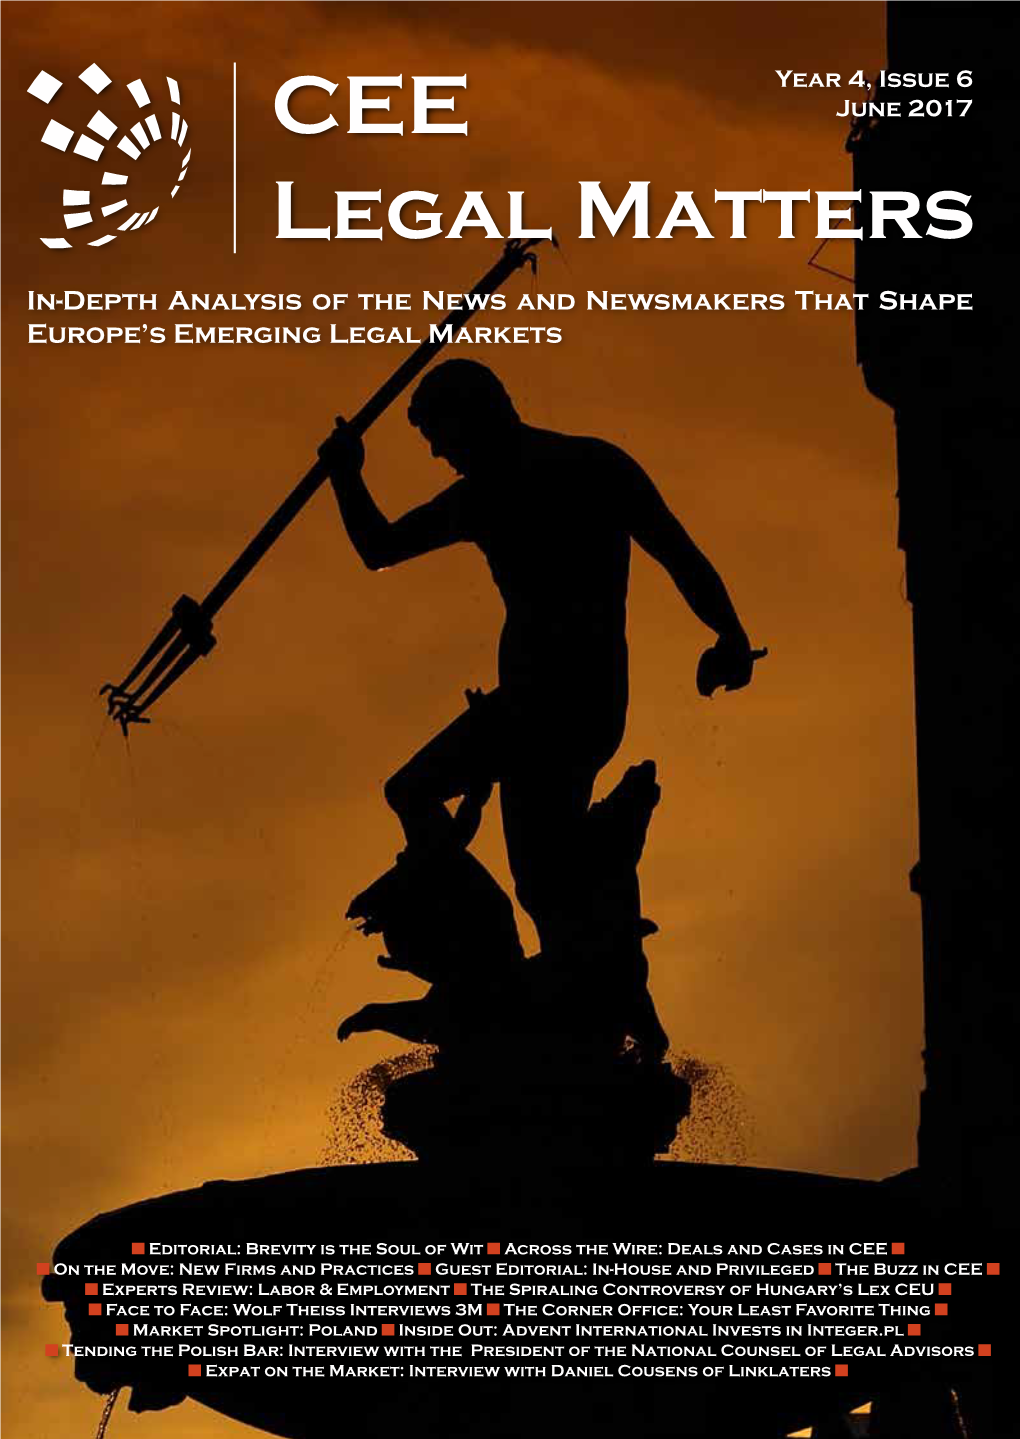 CEE Legal Matters Website, As Well As a Signifi- in Writing, in the Hope That Cant Amount of the Content in Every Issue of This We All Can Take Encourage- Magazine